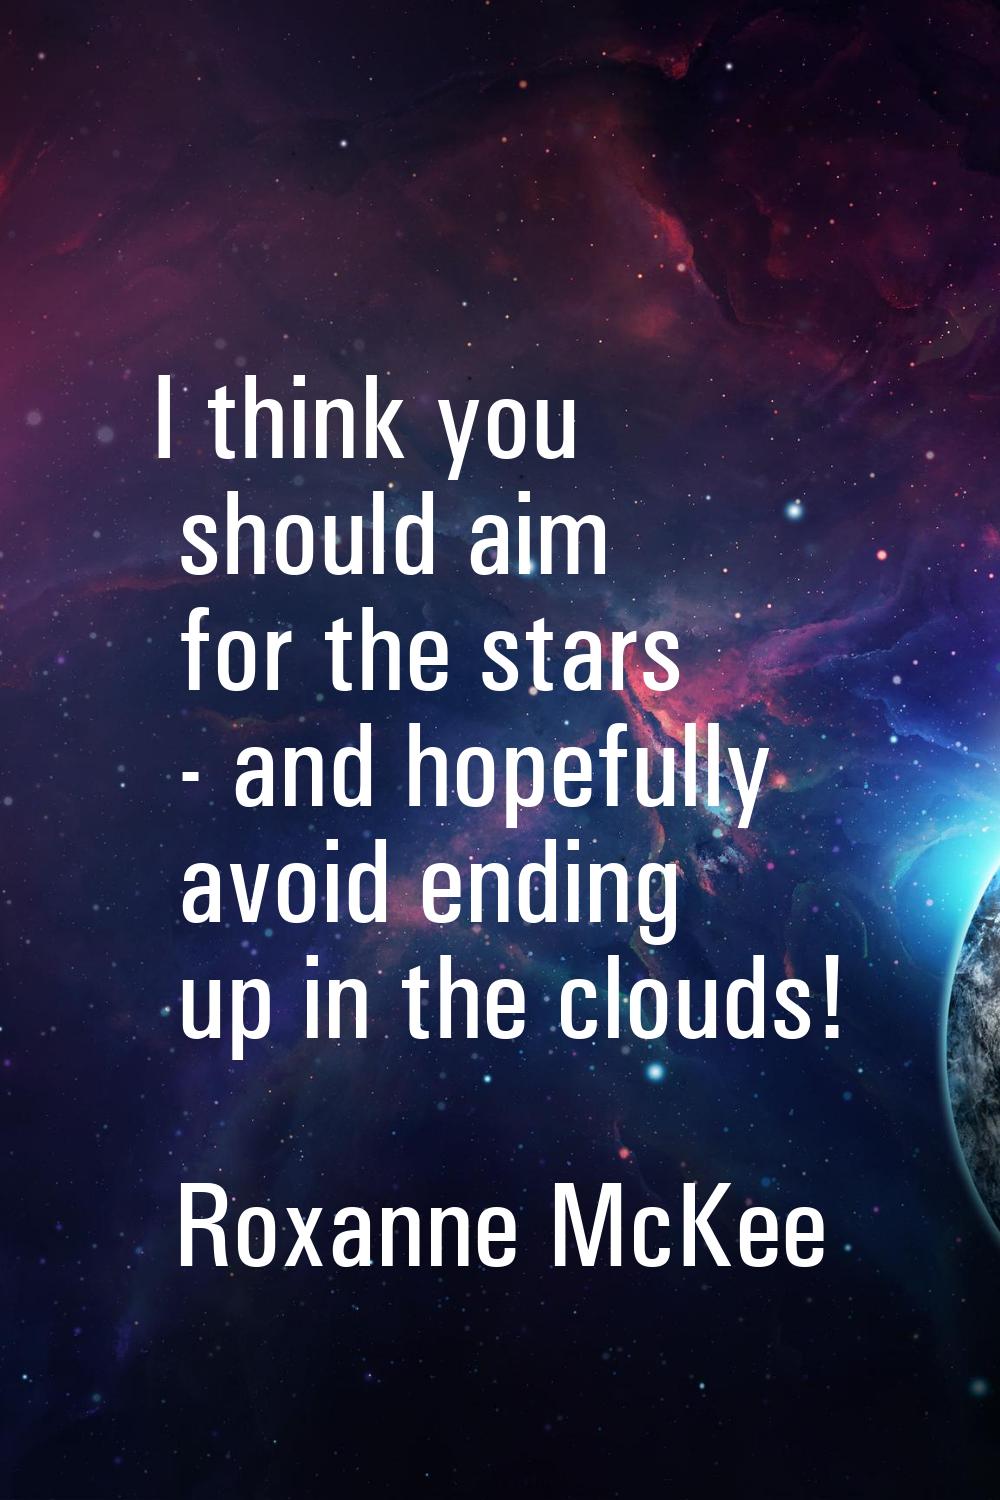 I think you should aim for the stars - and hopefully avoid ending up in the clouds!